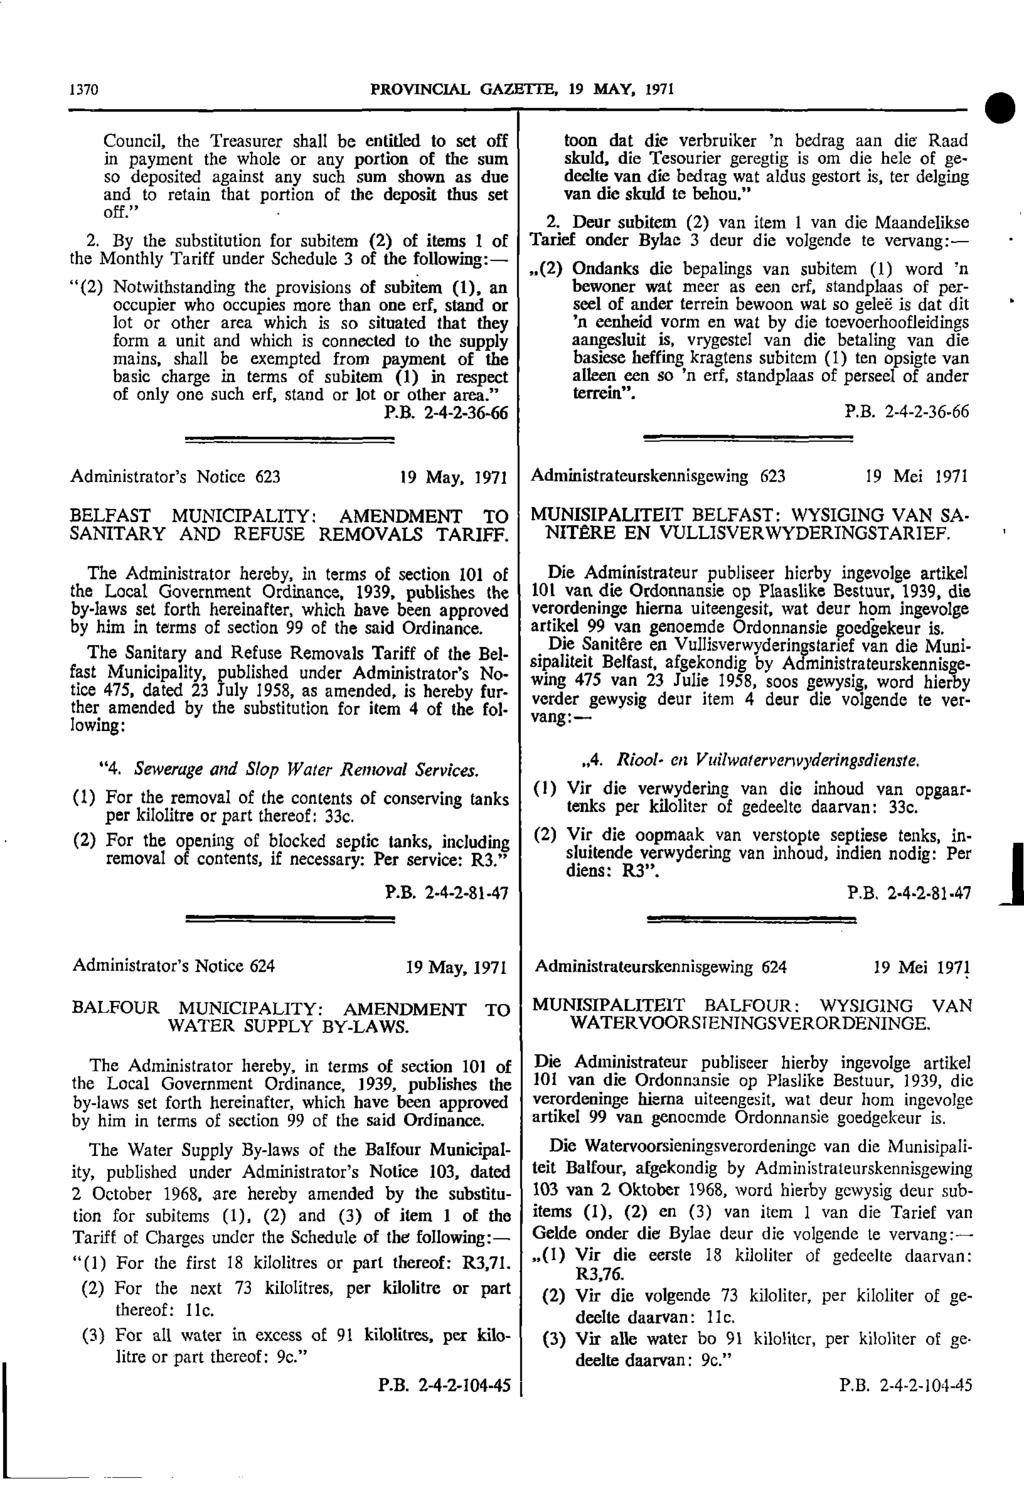 1370 PROVINCIAL GAZETTE 19 MAY 1971 Council the Treasurer shall be entitled to set off toon dat die verbruiker n bedrag aan die Raad in payment the whole or any portion of the sum skuld die Tesourier